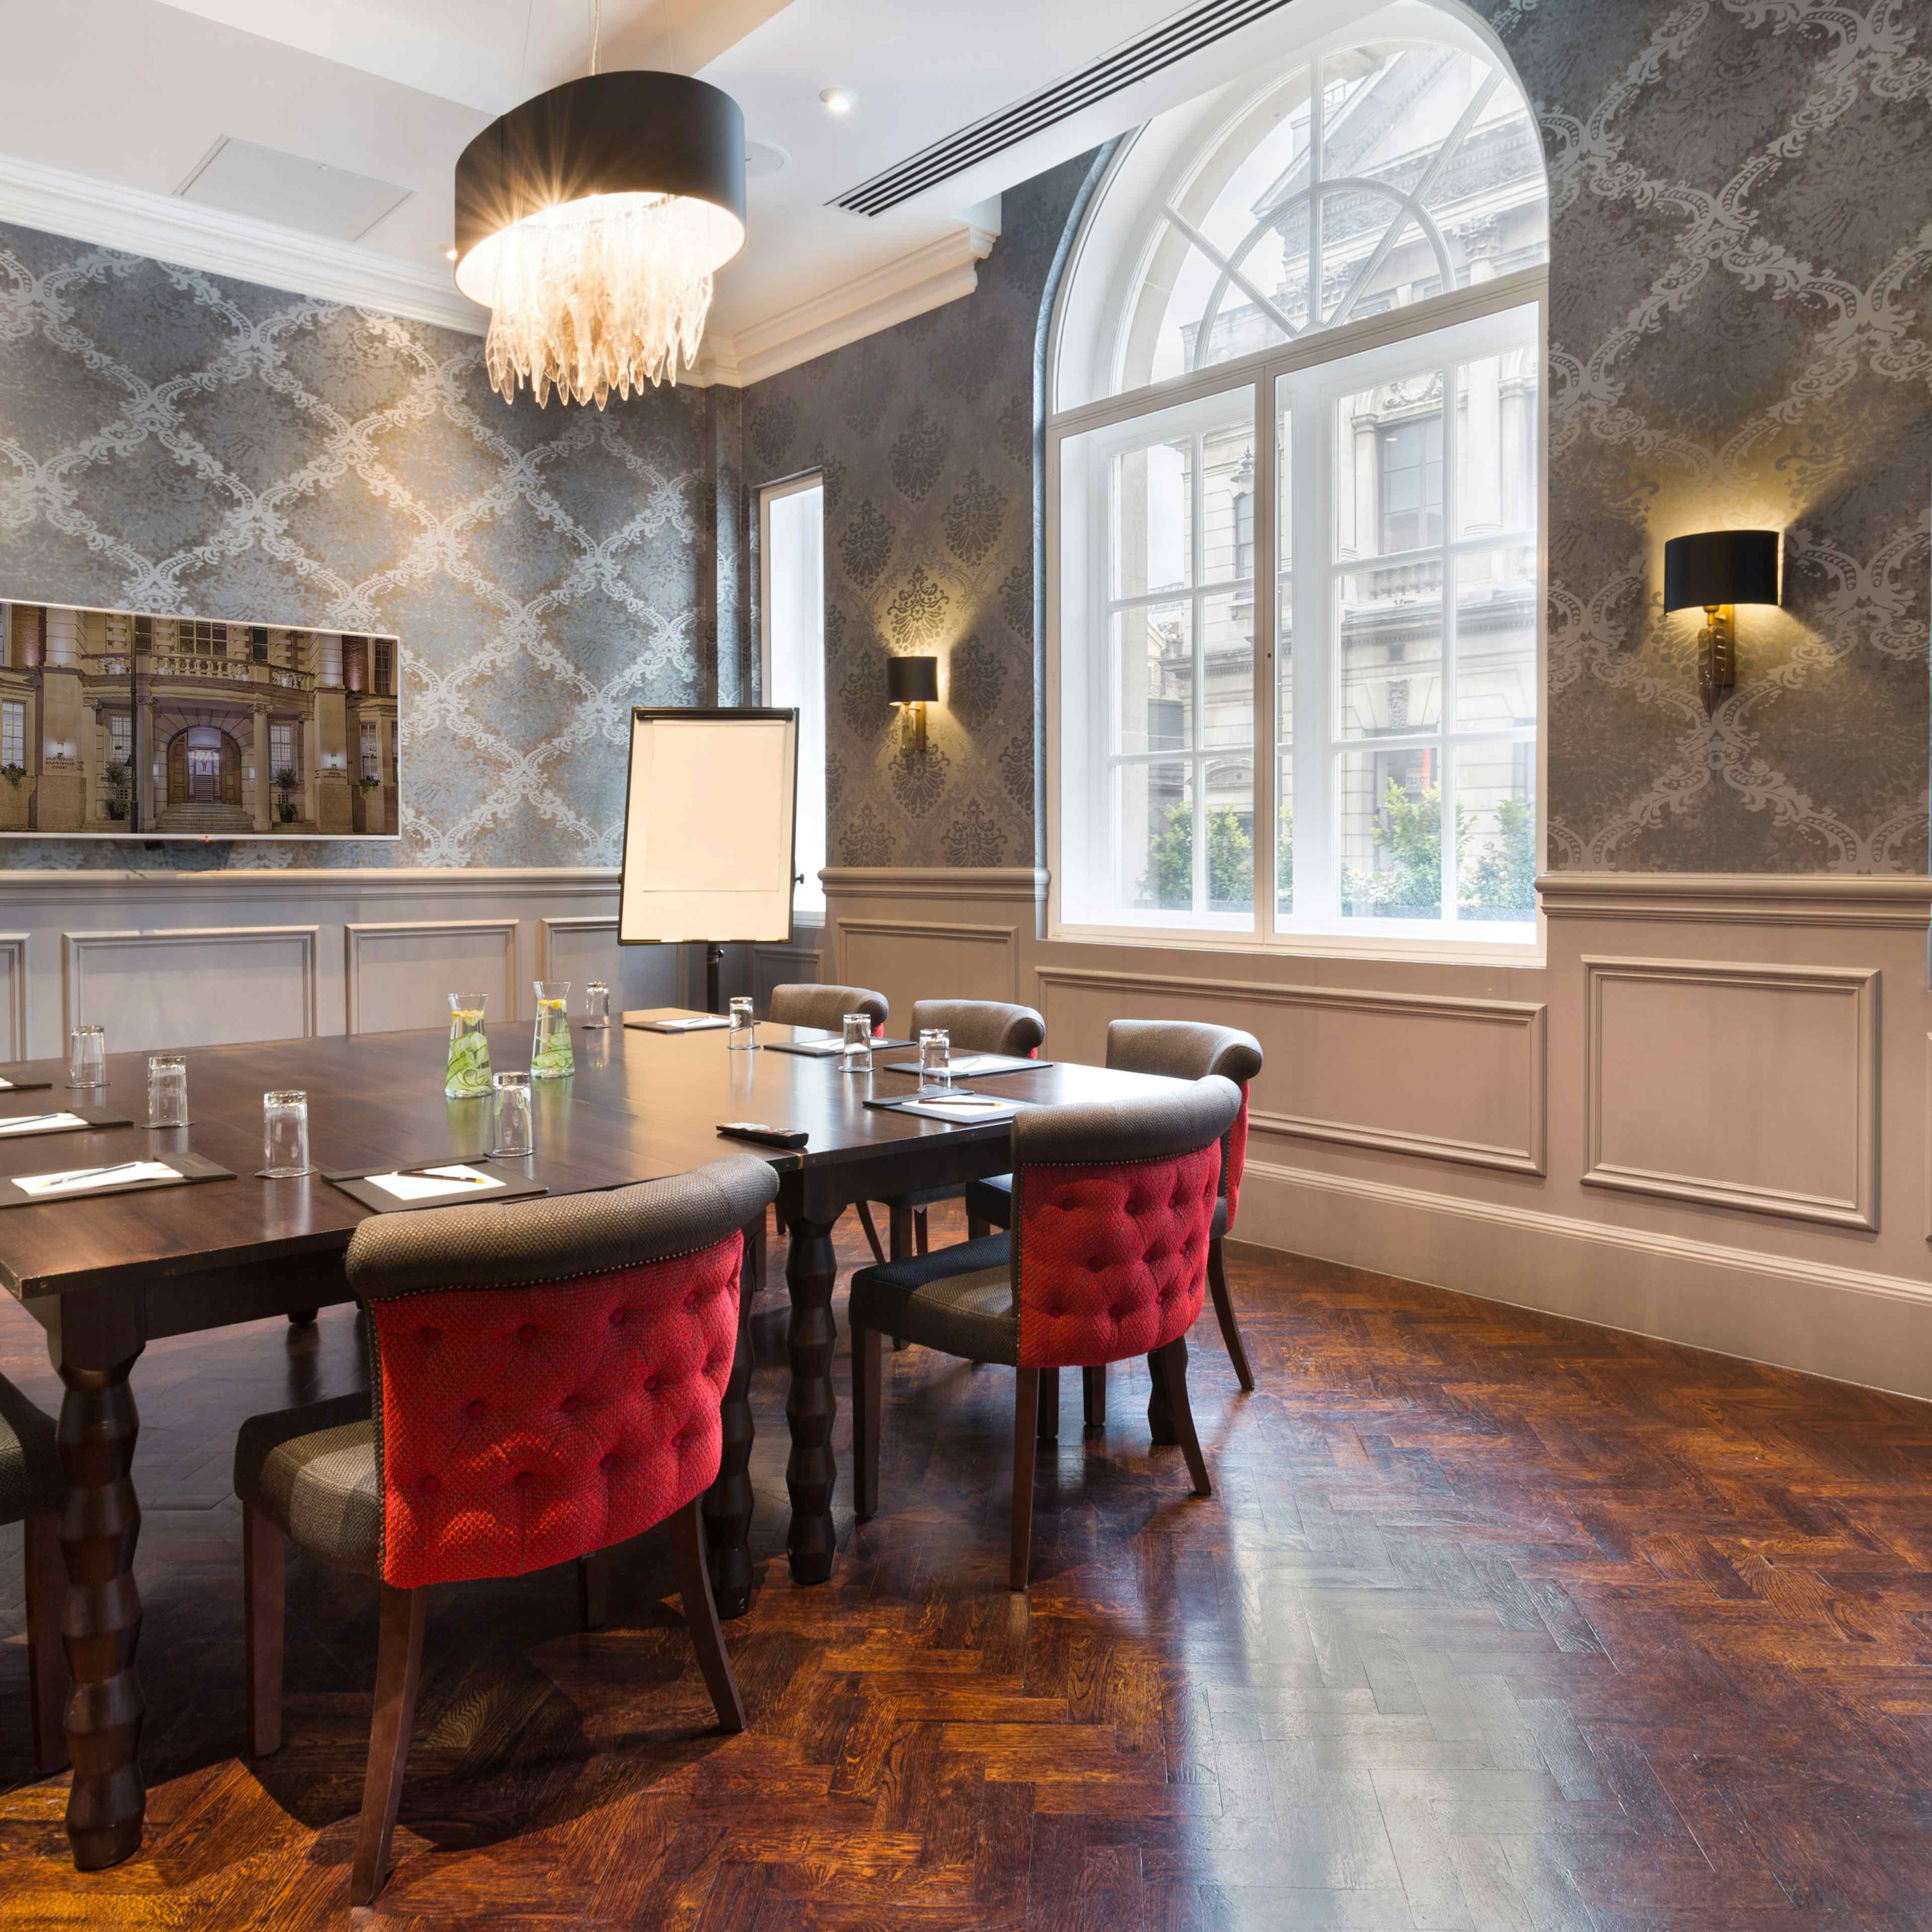 Courthouse Hotel Shoreditch - Private Dining Room image 3